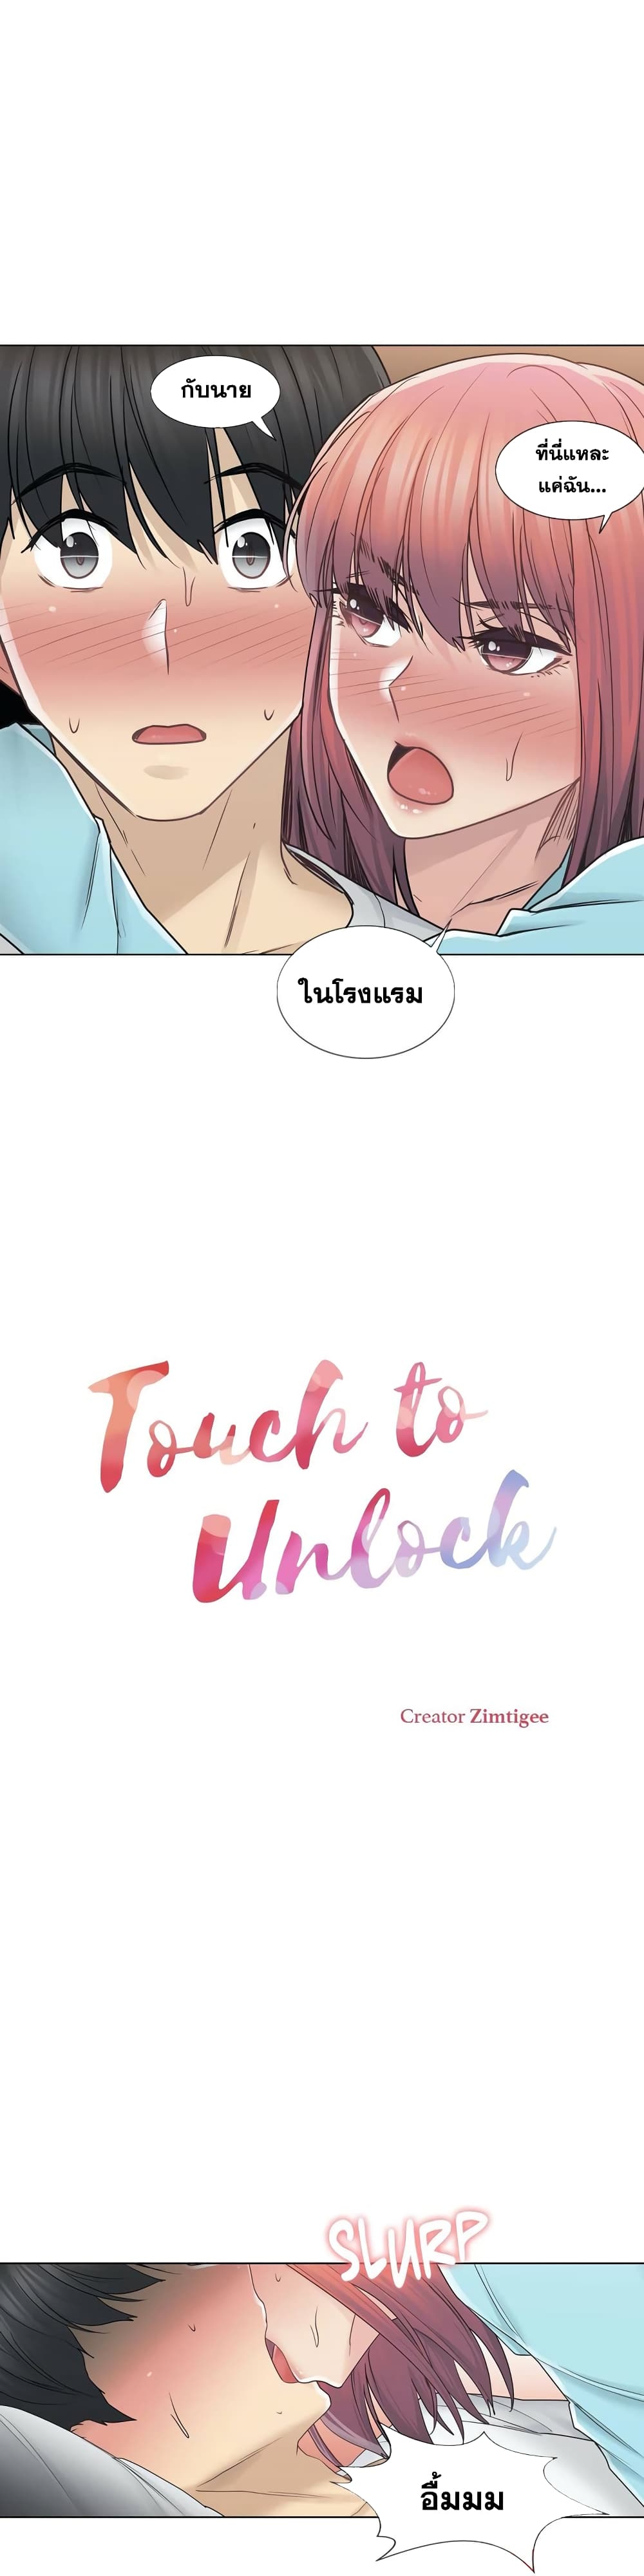 Touch To Unlock 44 (5)